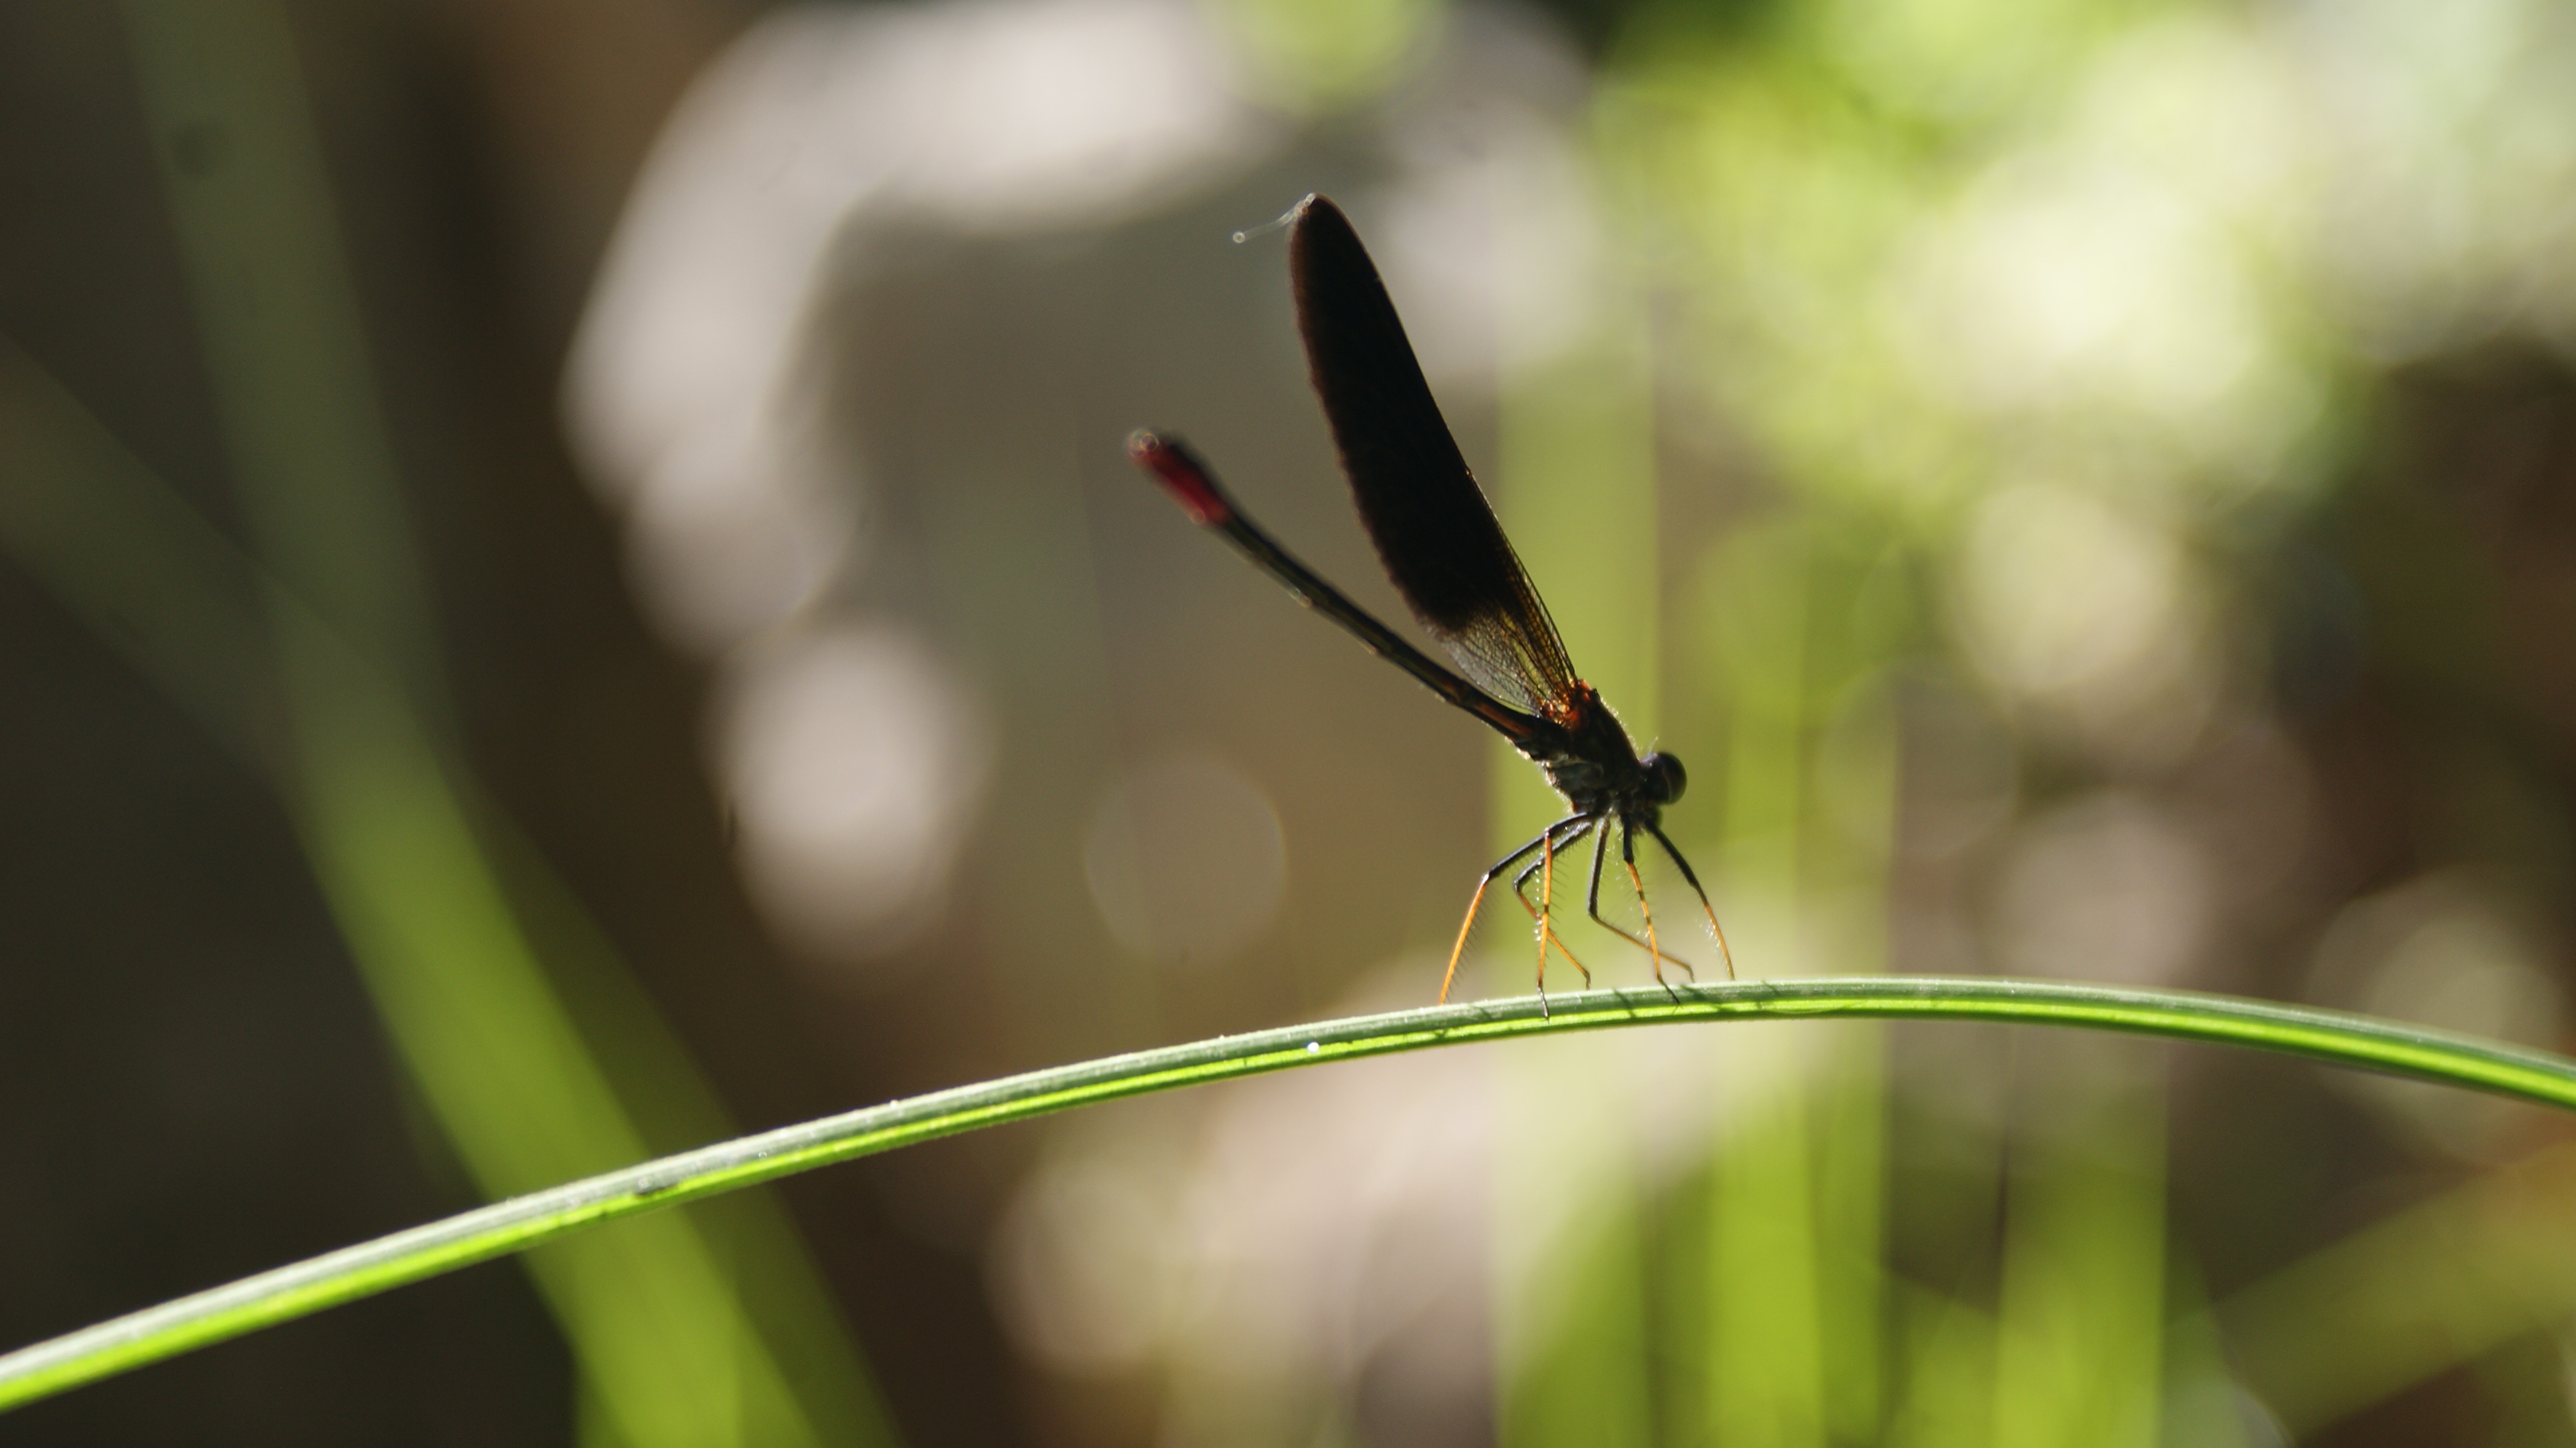 General 3872x2176 landscape nature photography insect dragonflies